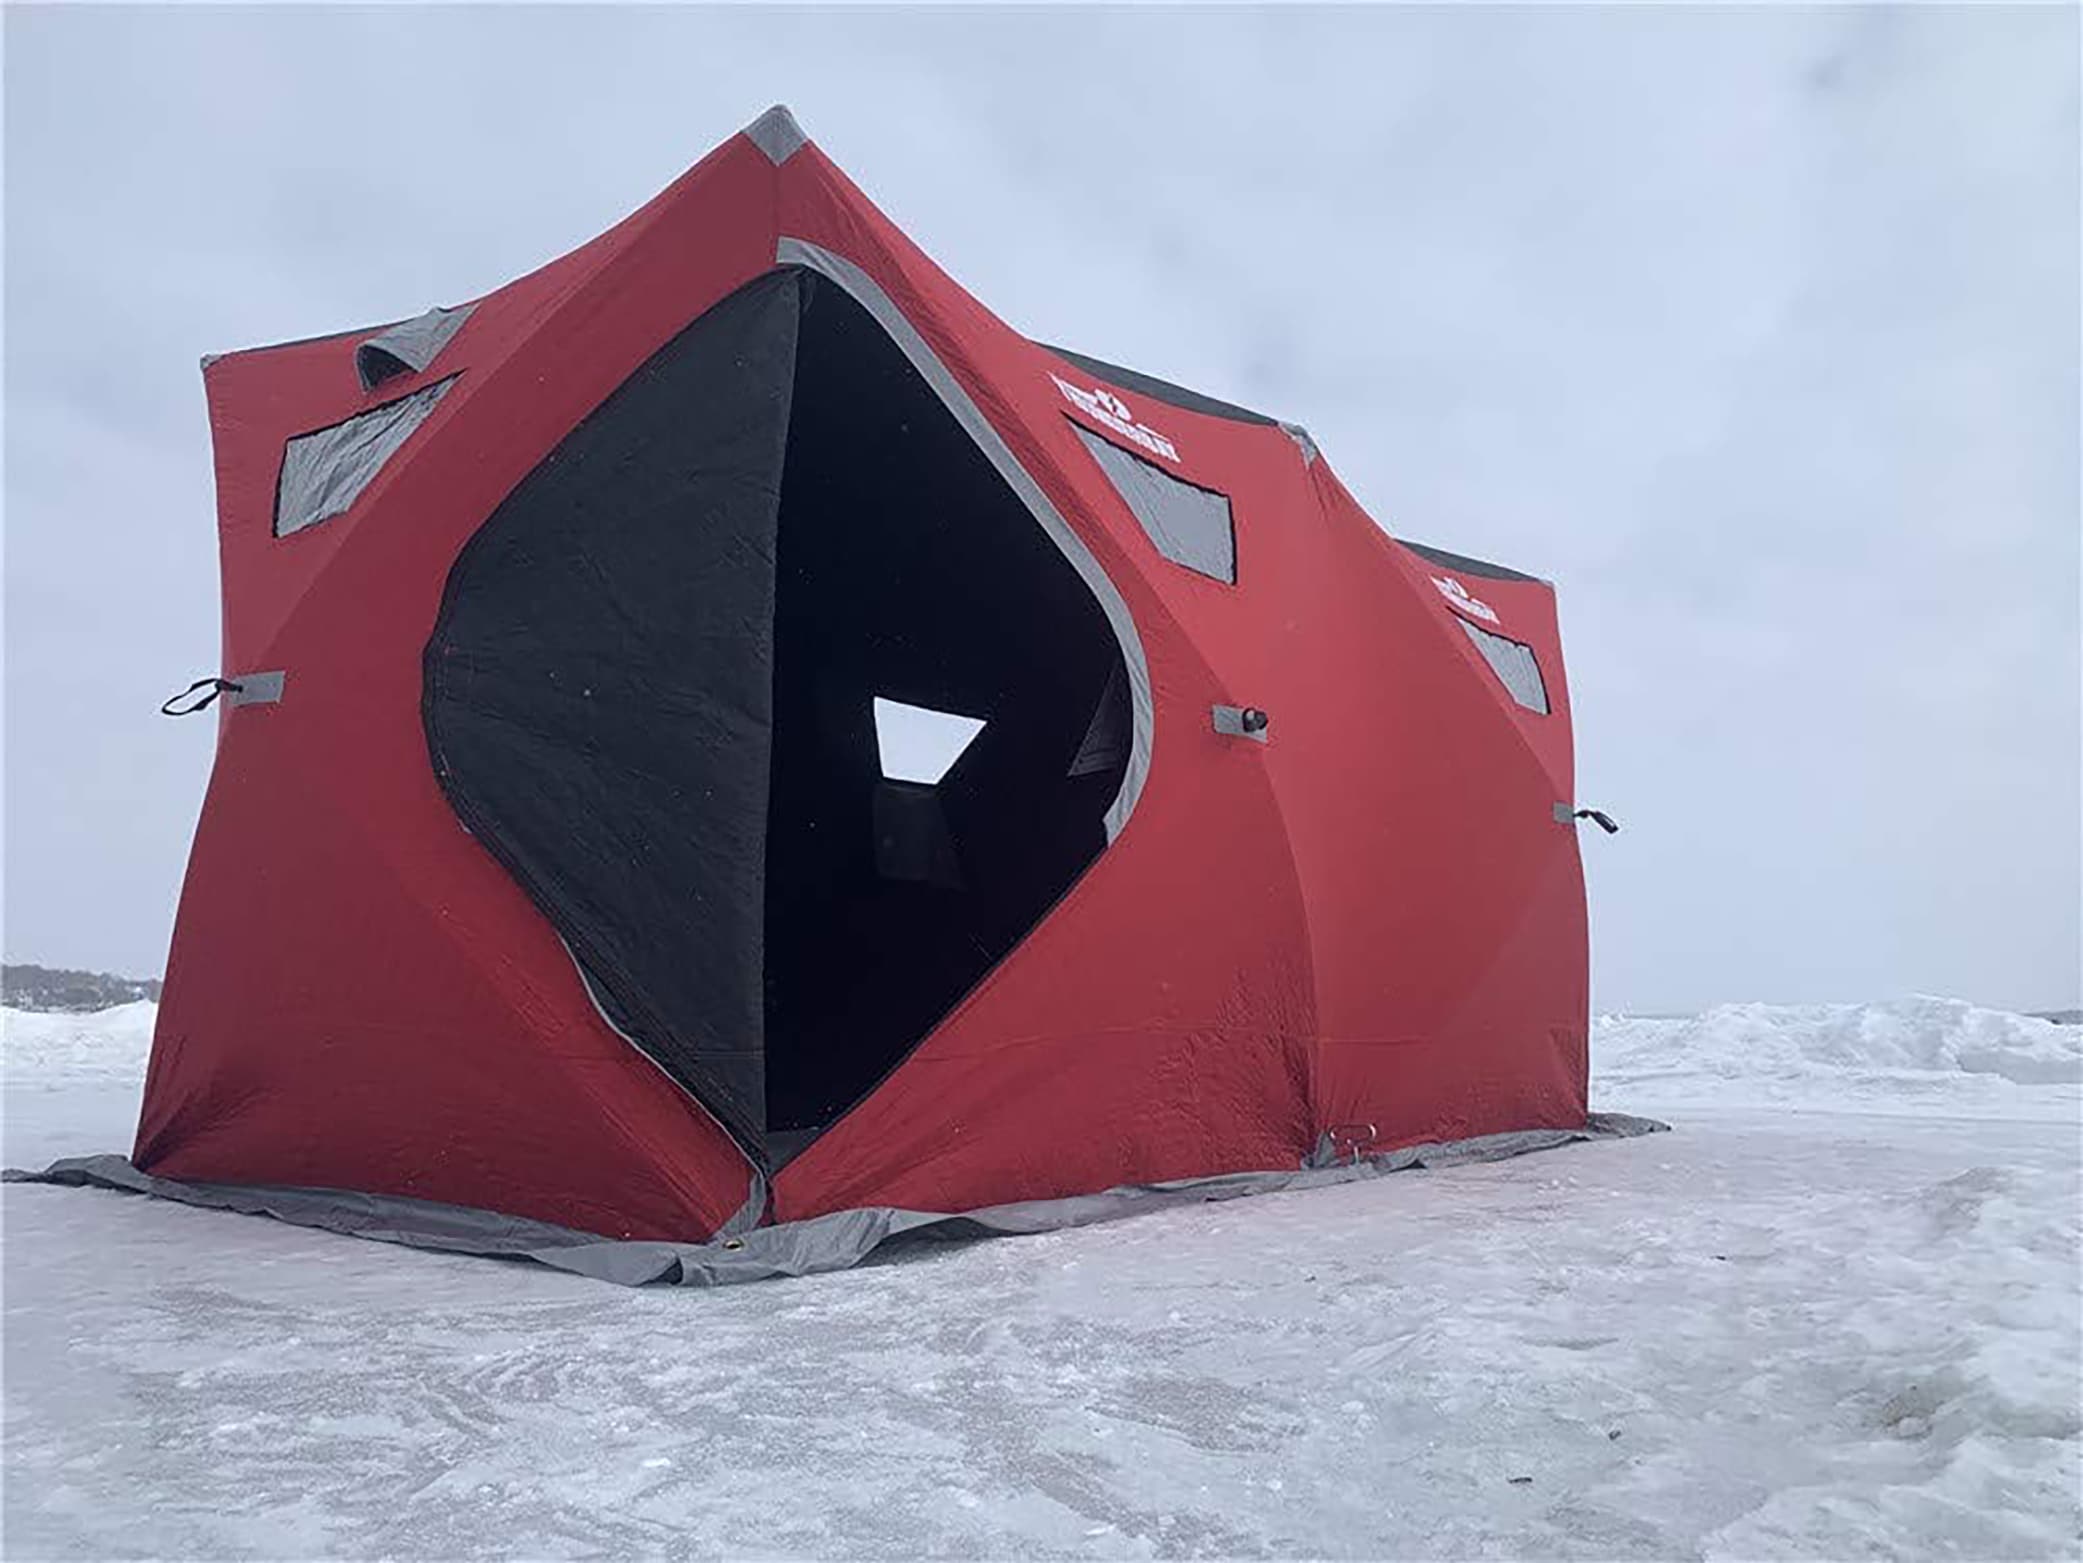 Tents And Shelters Hexagonal Winter Ice Fishing Tent Large Space Capacity 5  6 People Thickened Cotton Keep Warm With 2doors 6skylights 2air From  Chinastore07, $362.78